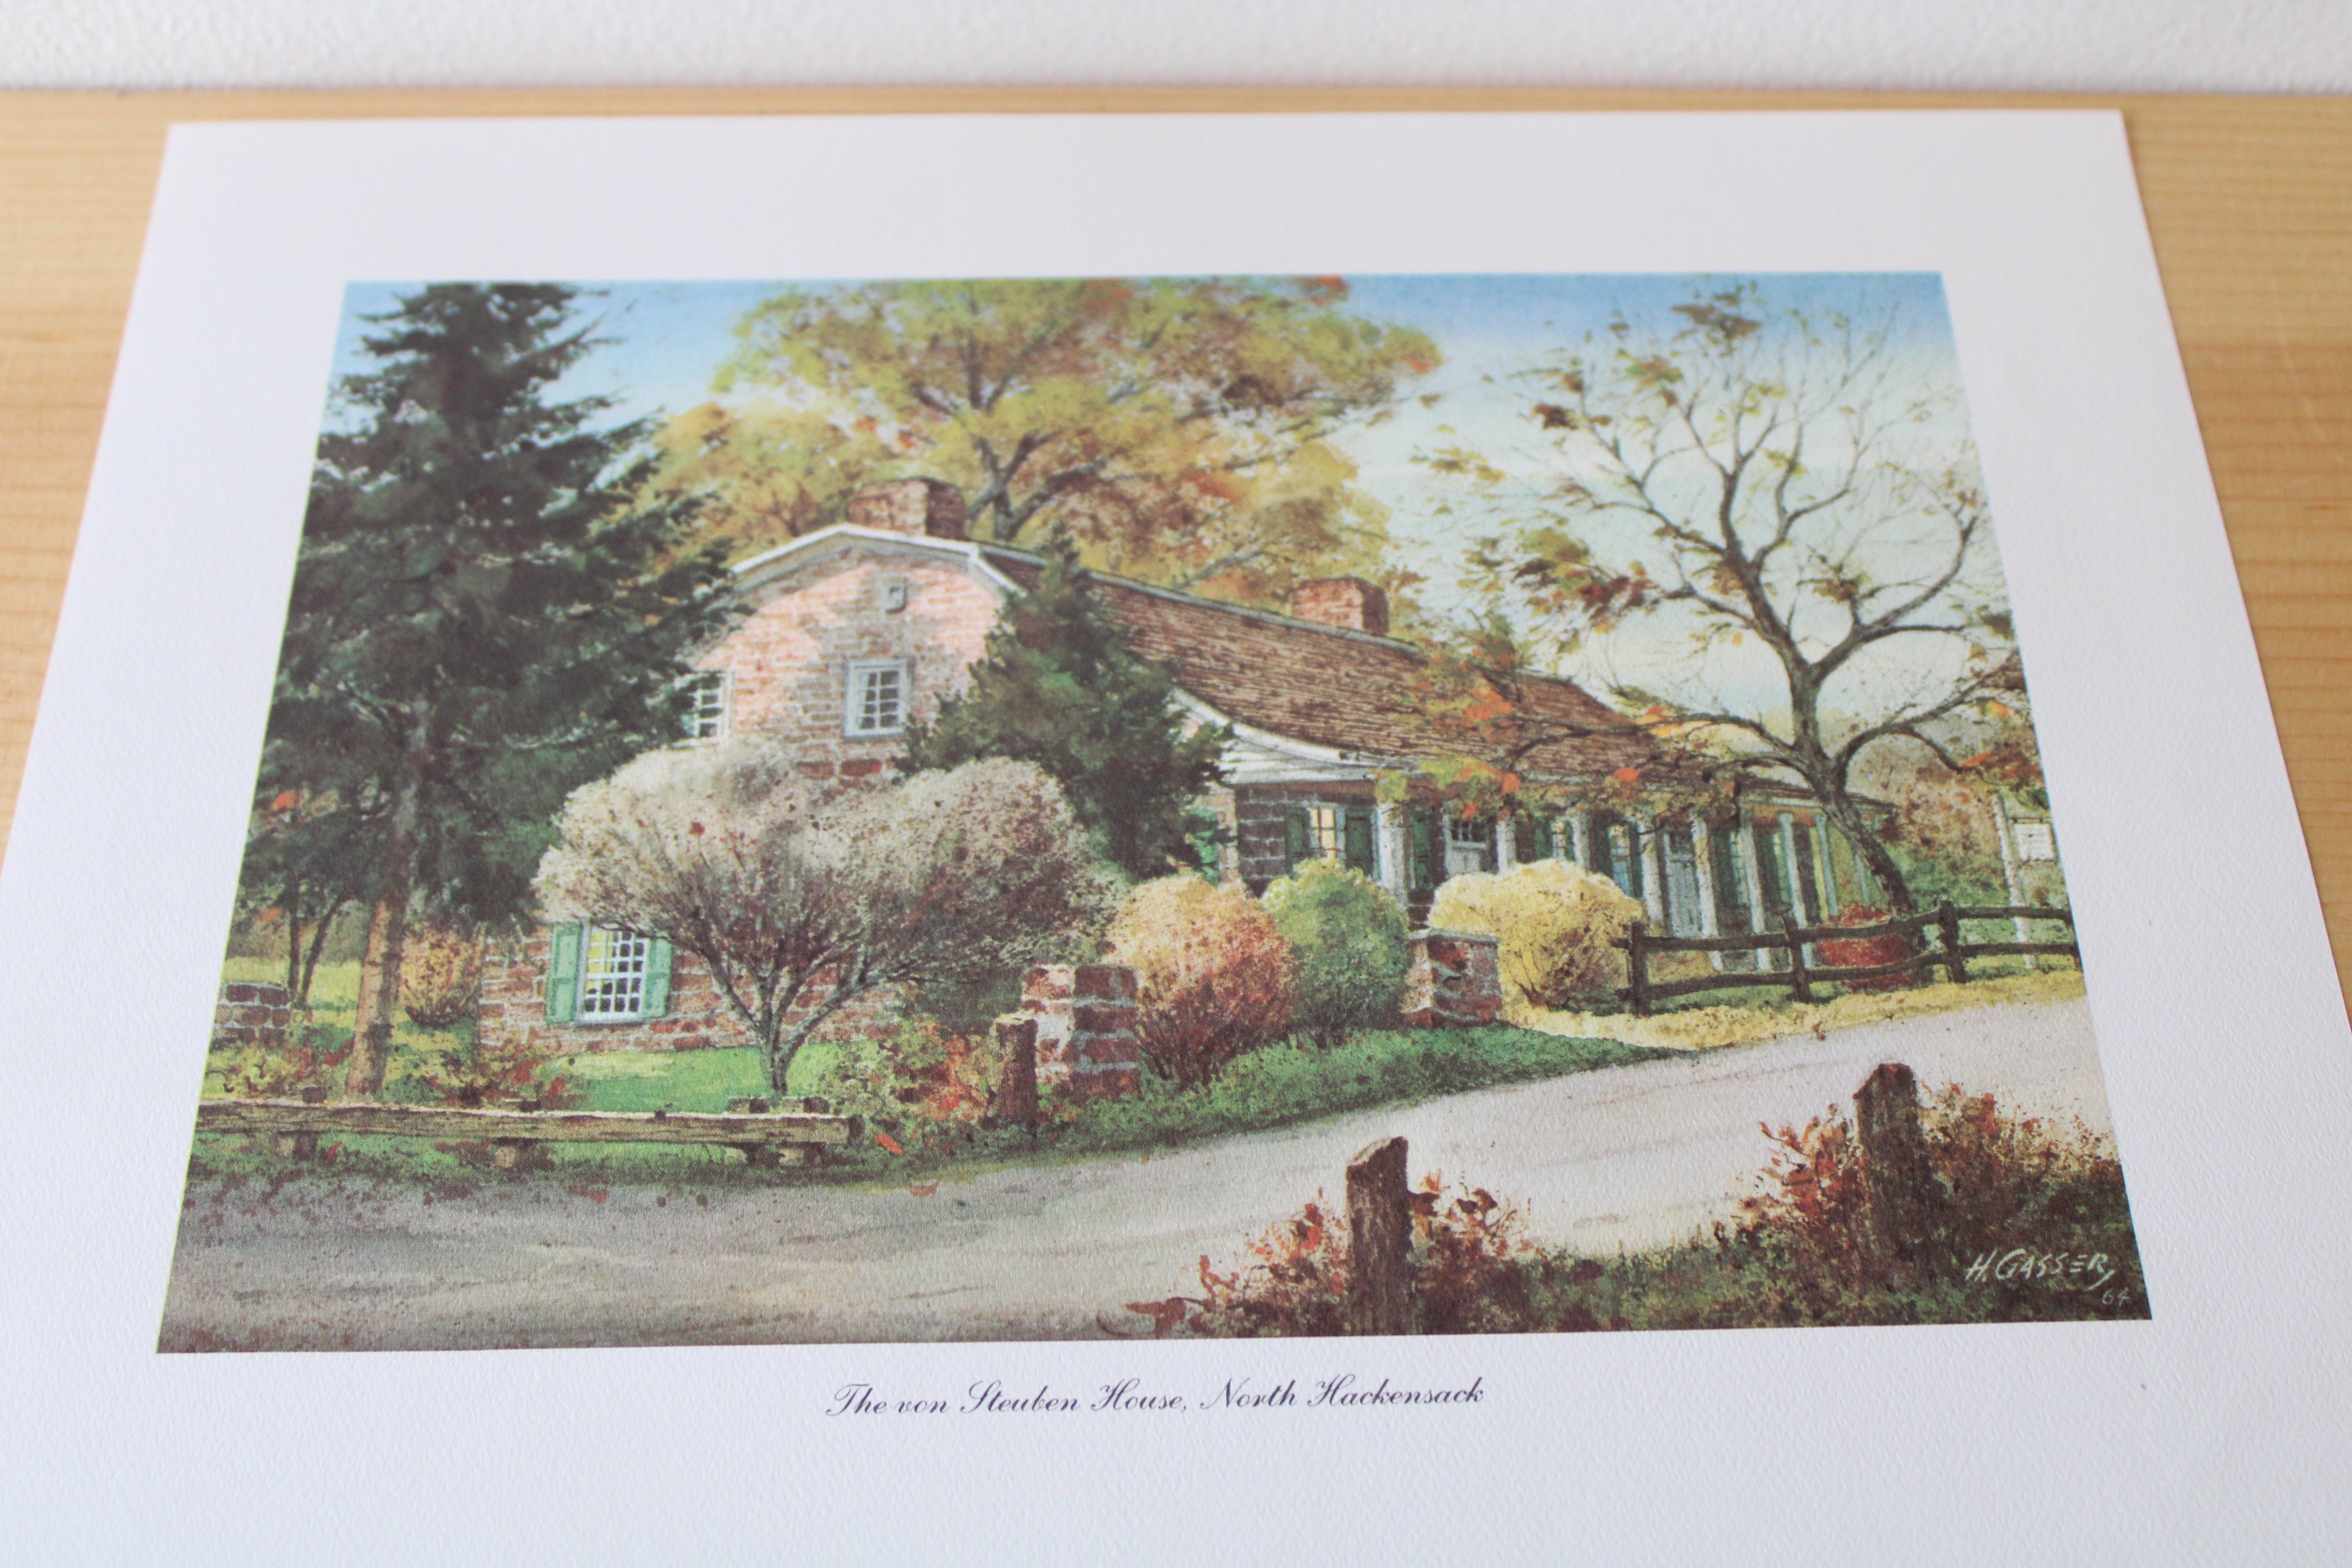 New Jersey Tercentenary Prints From The Prudential Prints | 6 Prints